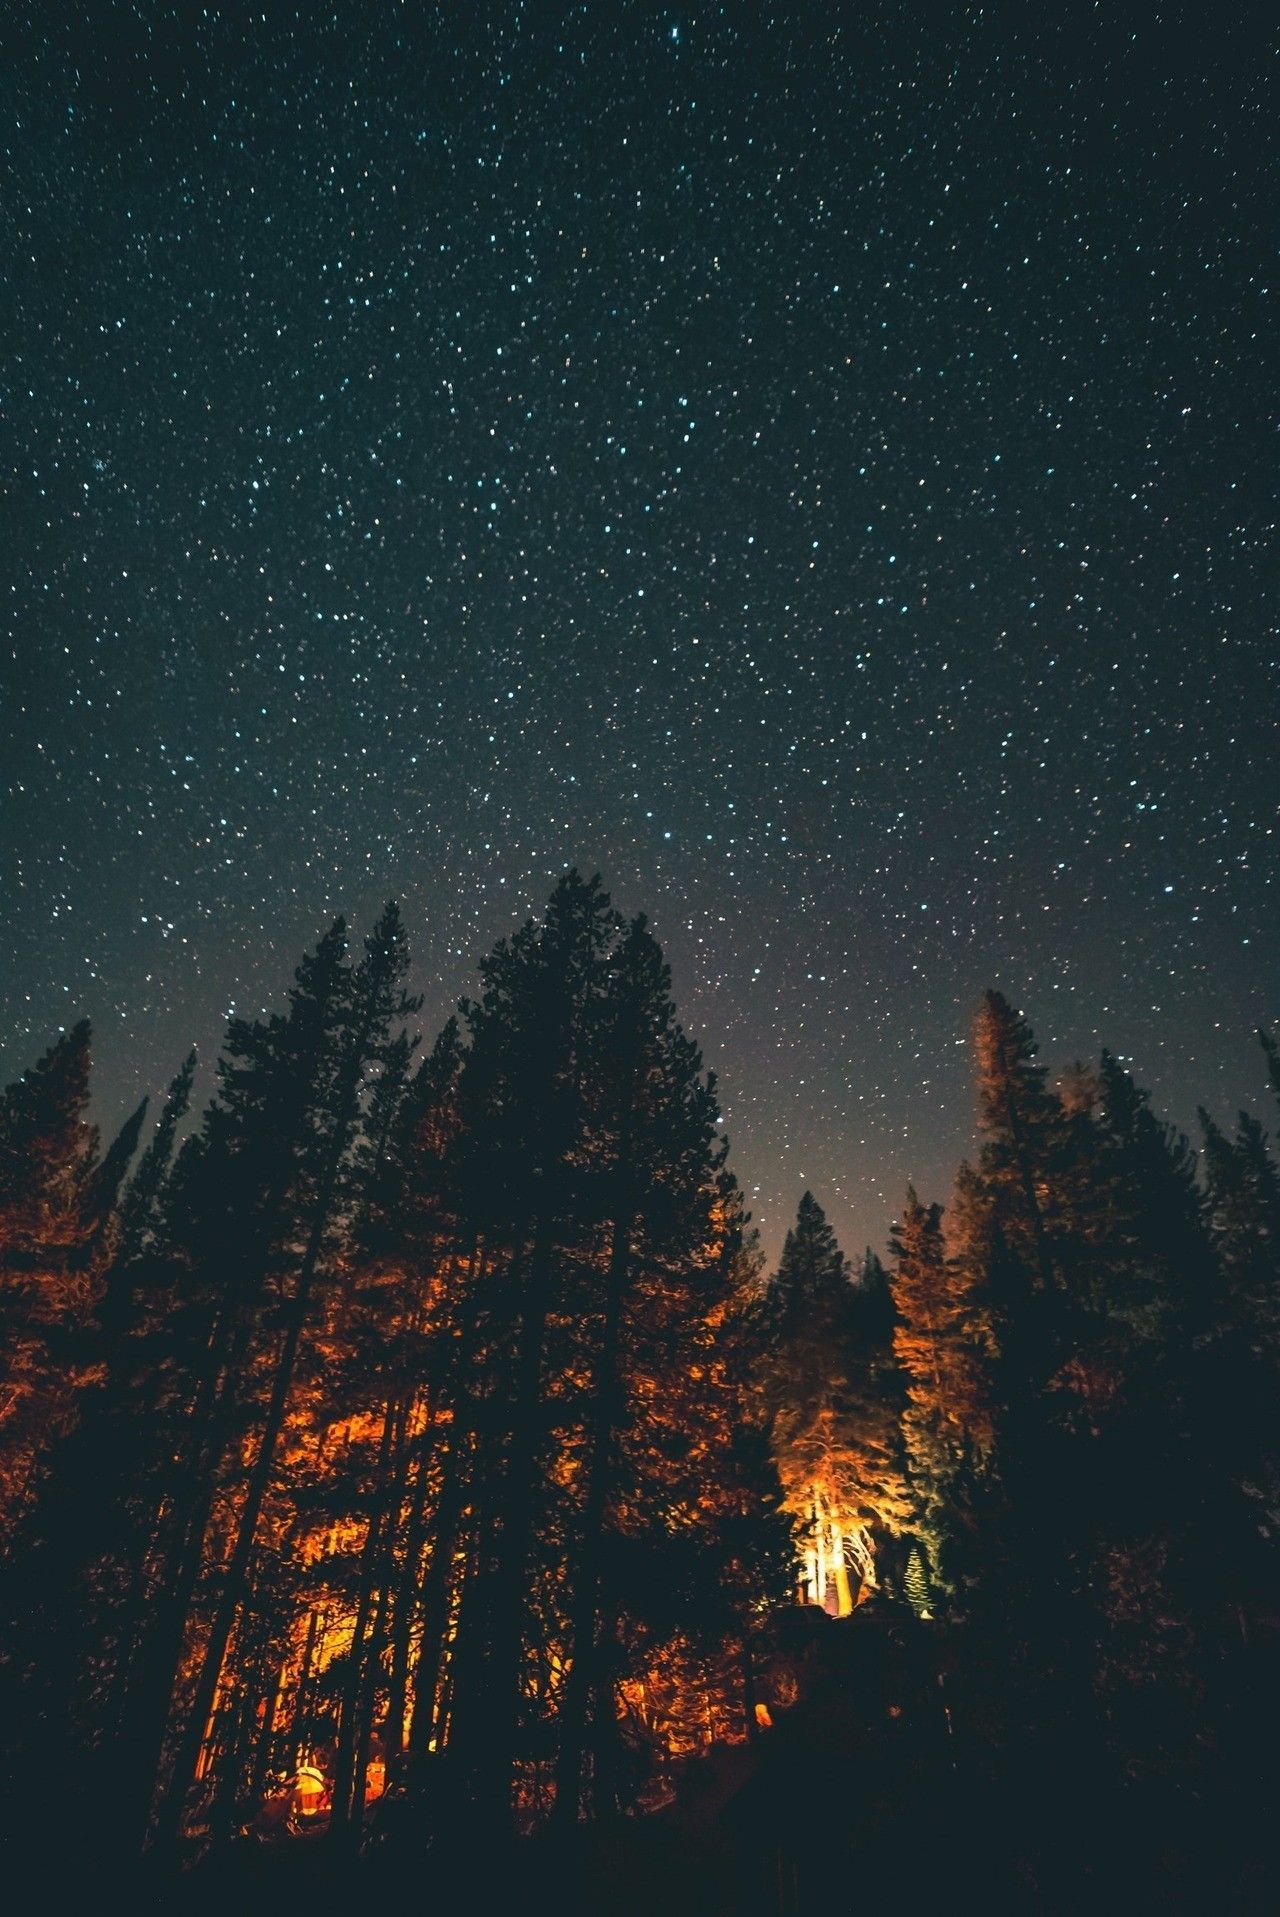 A night sky with stars and trees - Woods